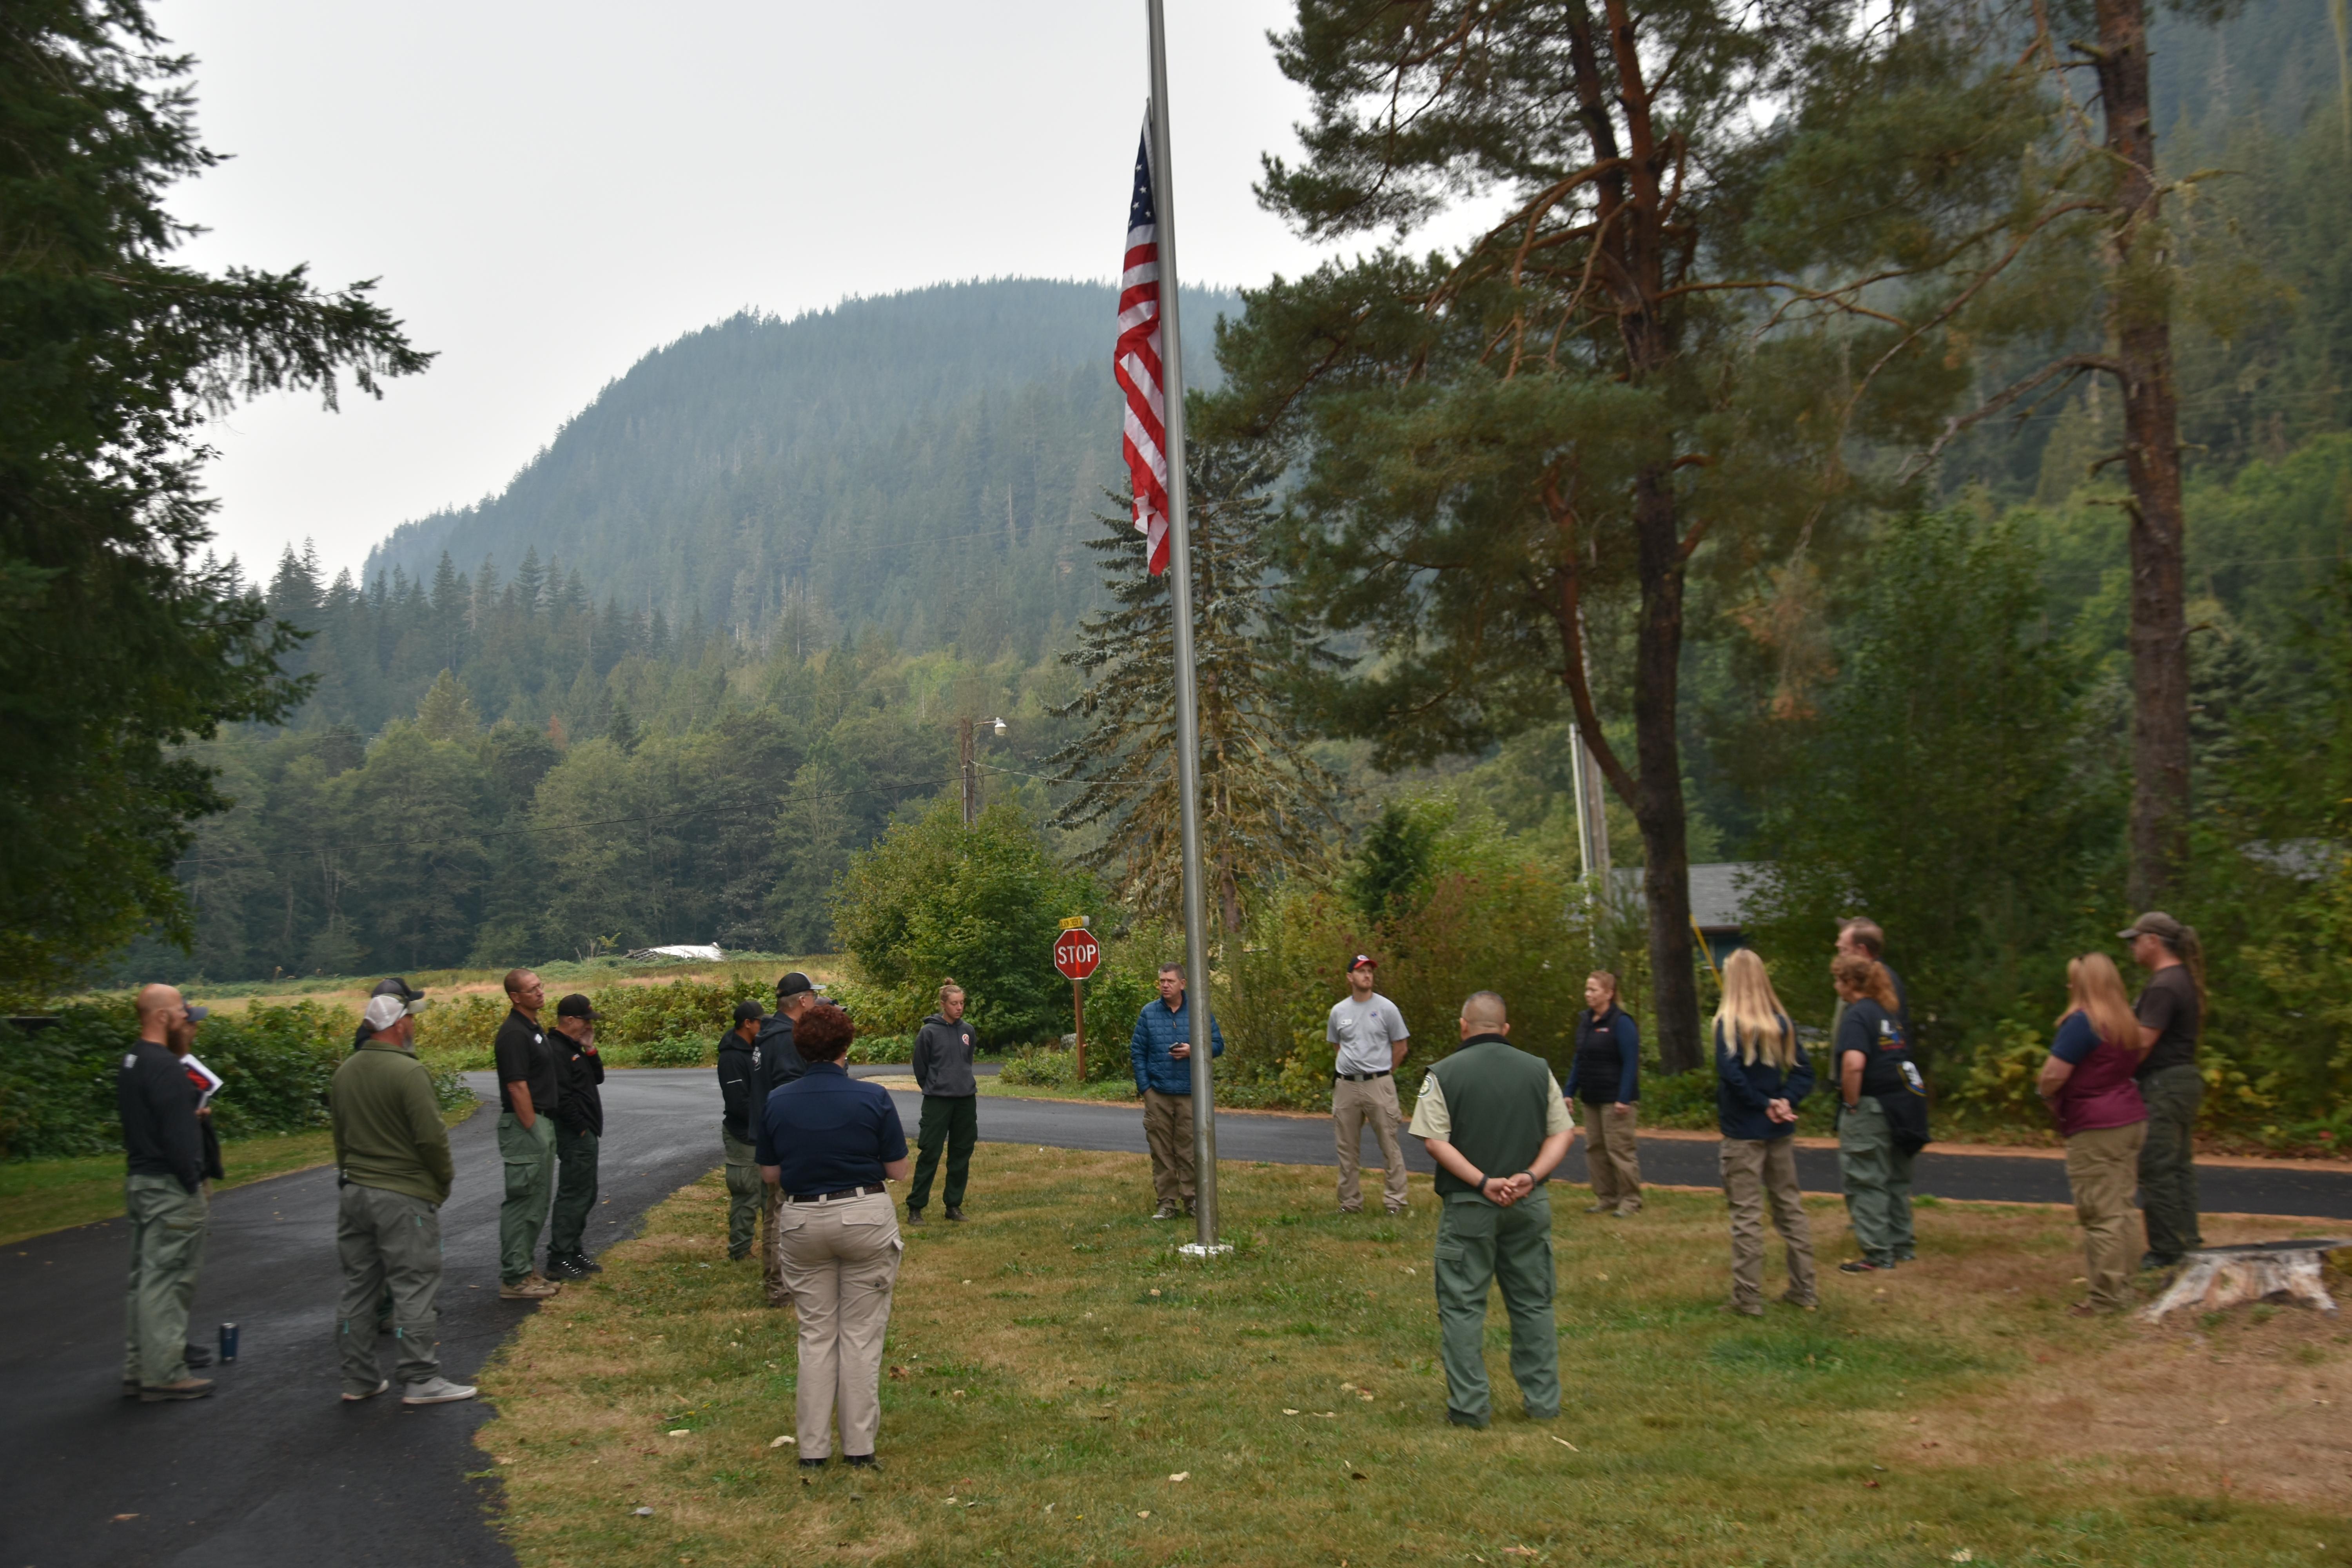 A group of people standing in reverence around a flagpole.